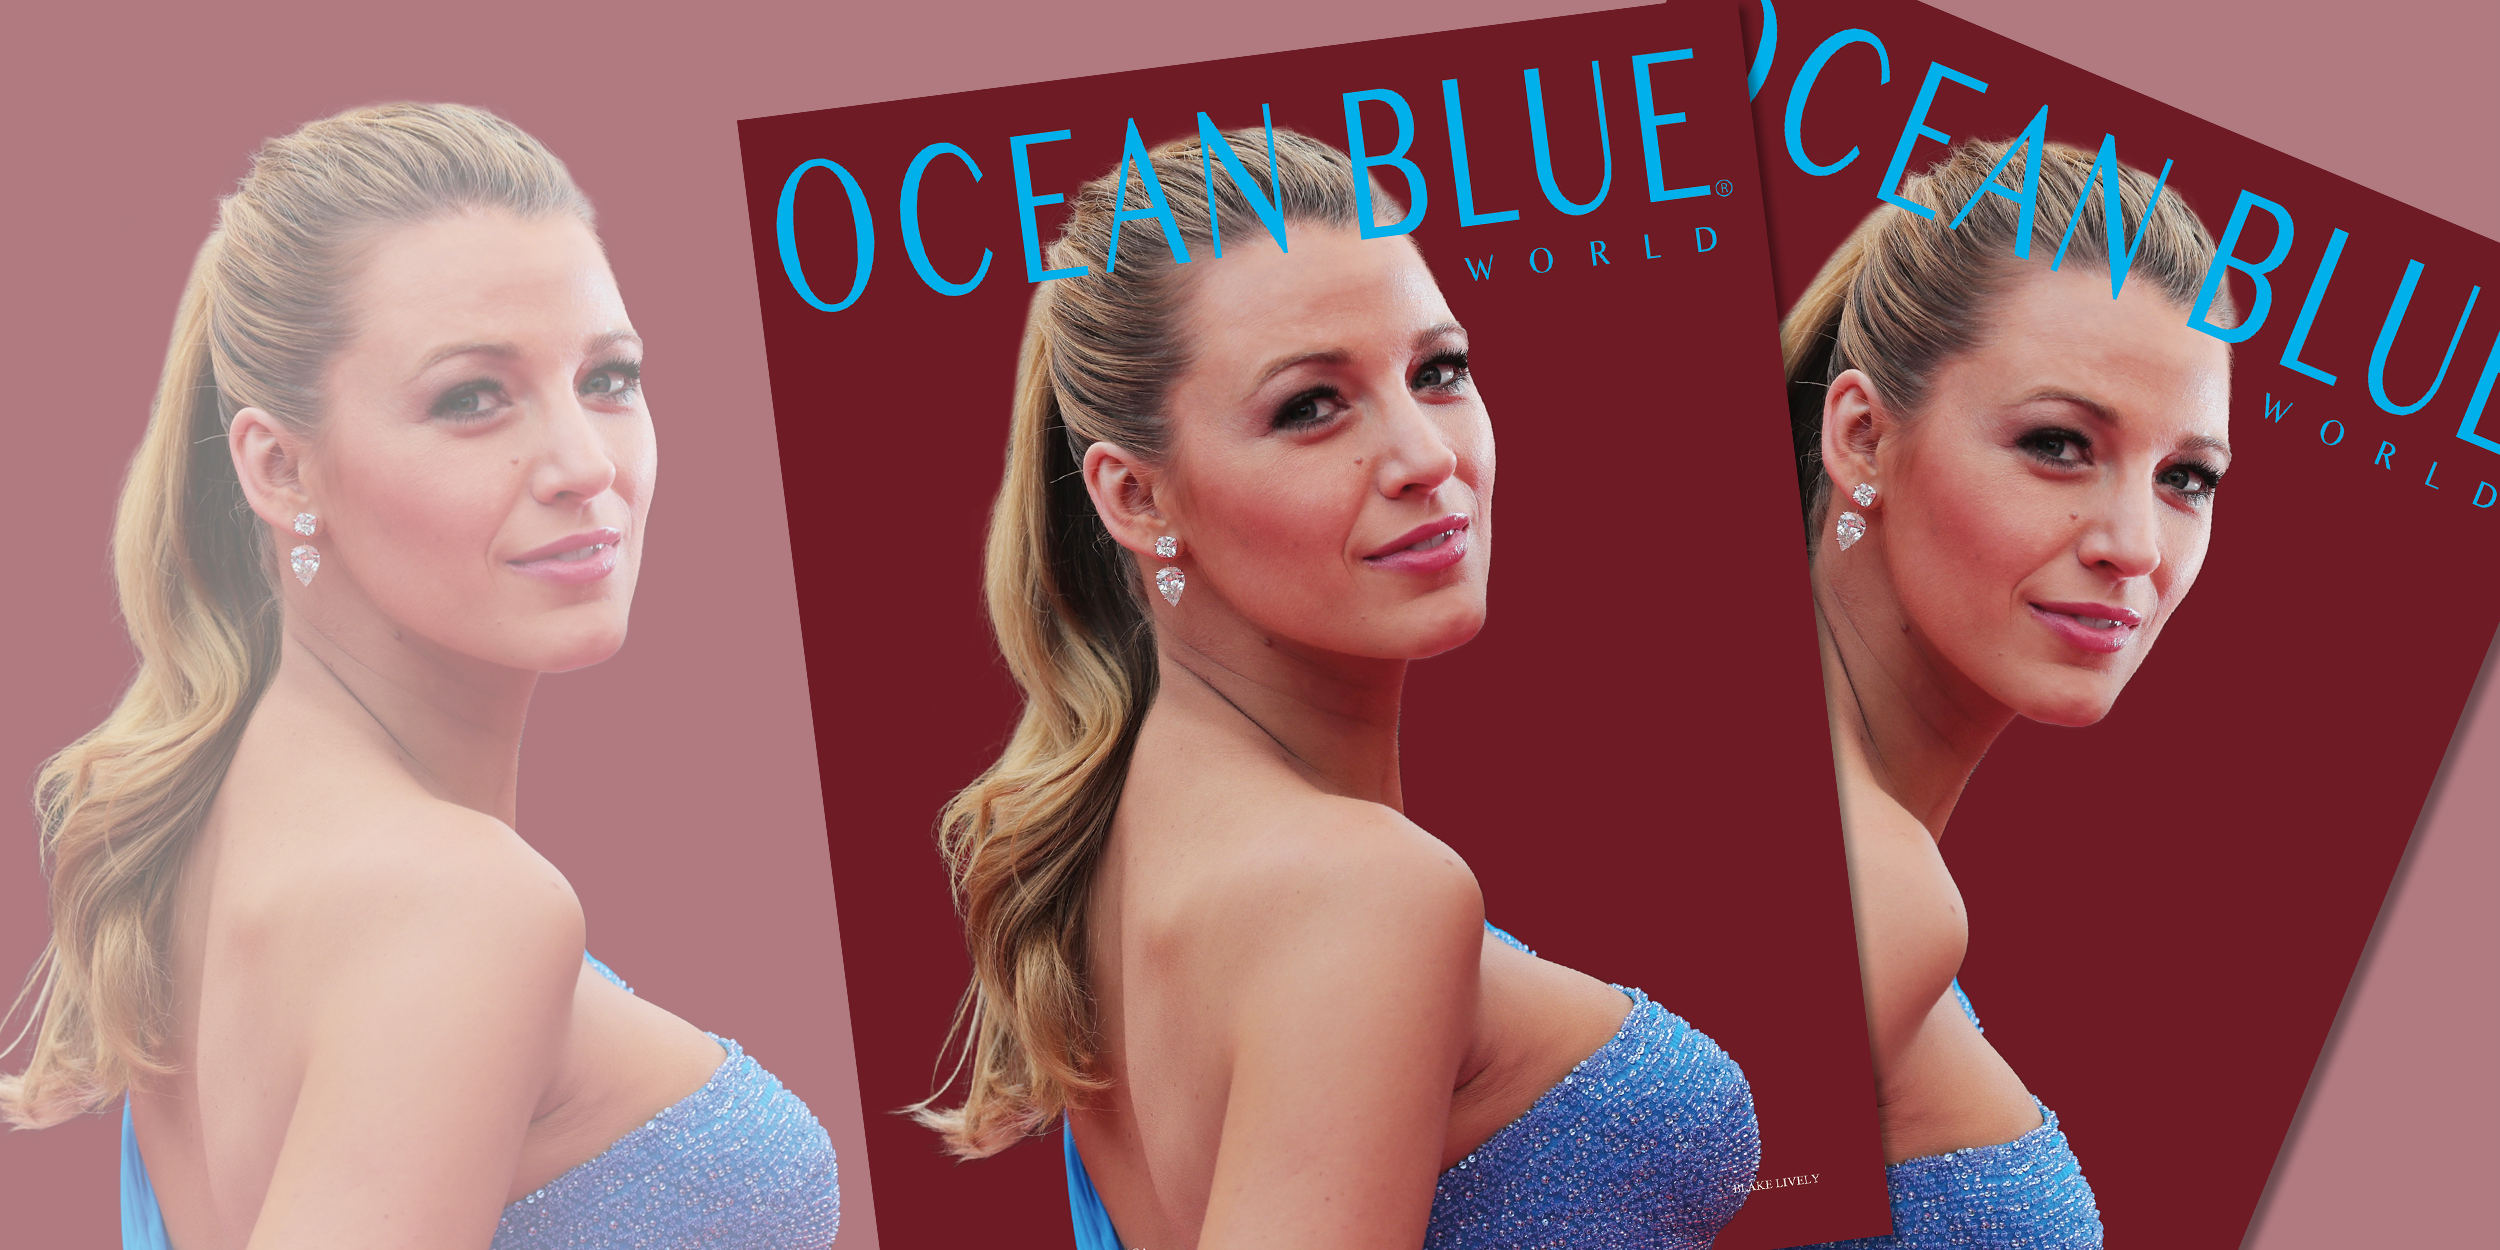 JUST RELEASED! OCEAN BLUE’S 31ST EDITION!